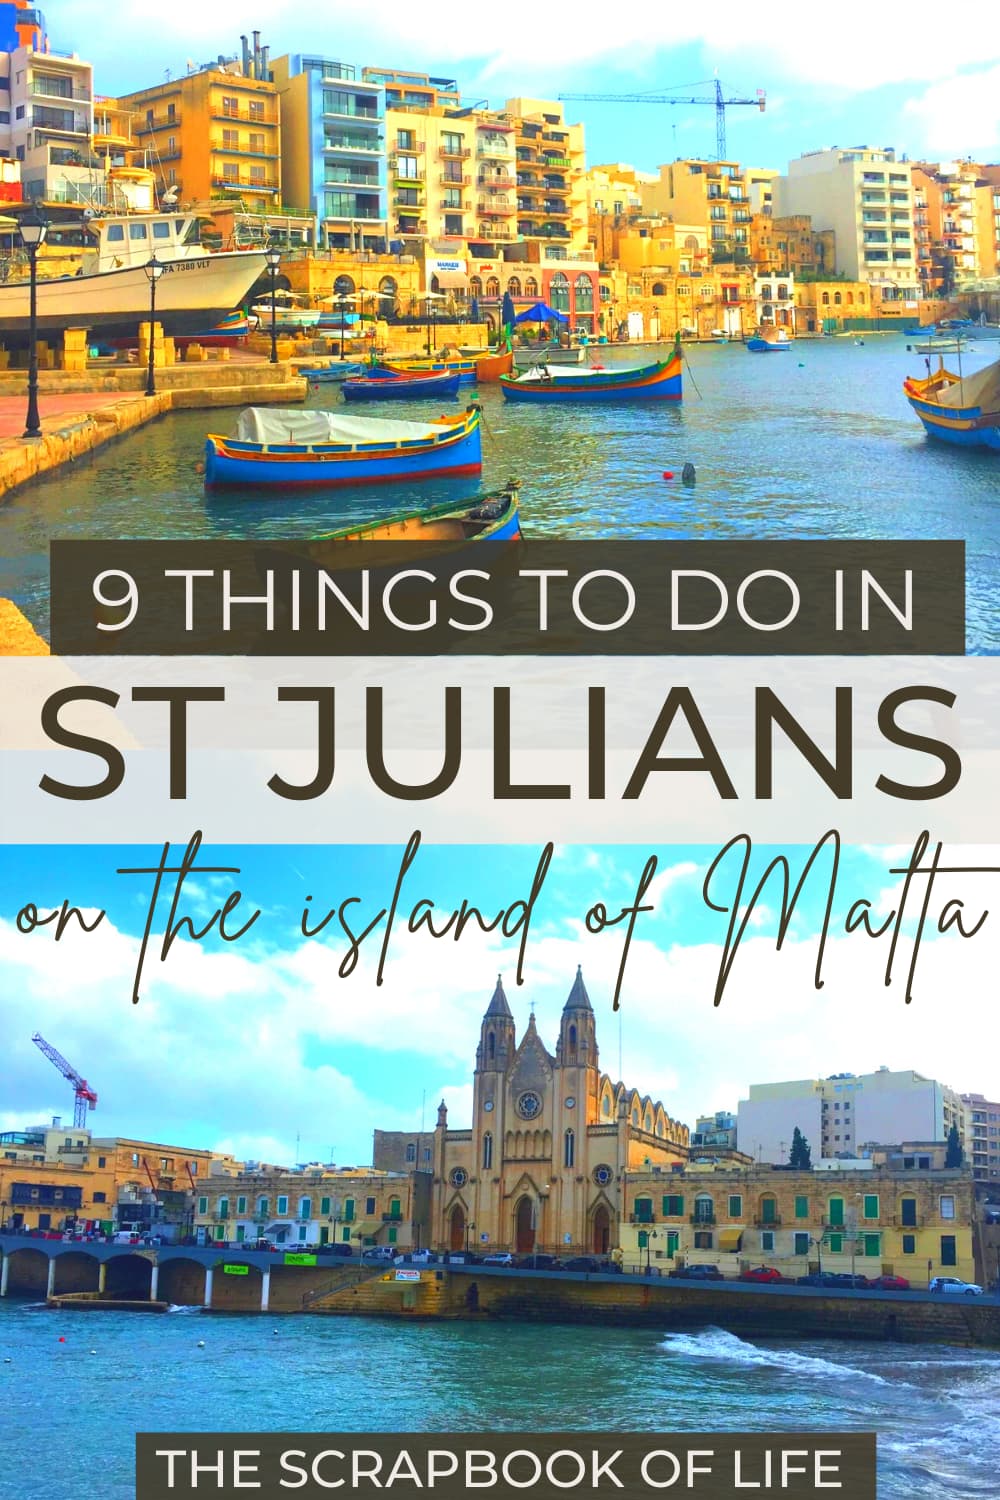 Things to do in St Julians, Malta